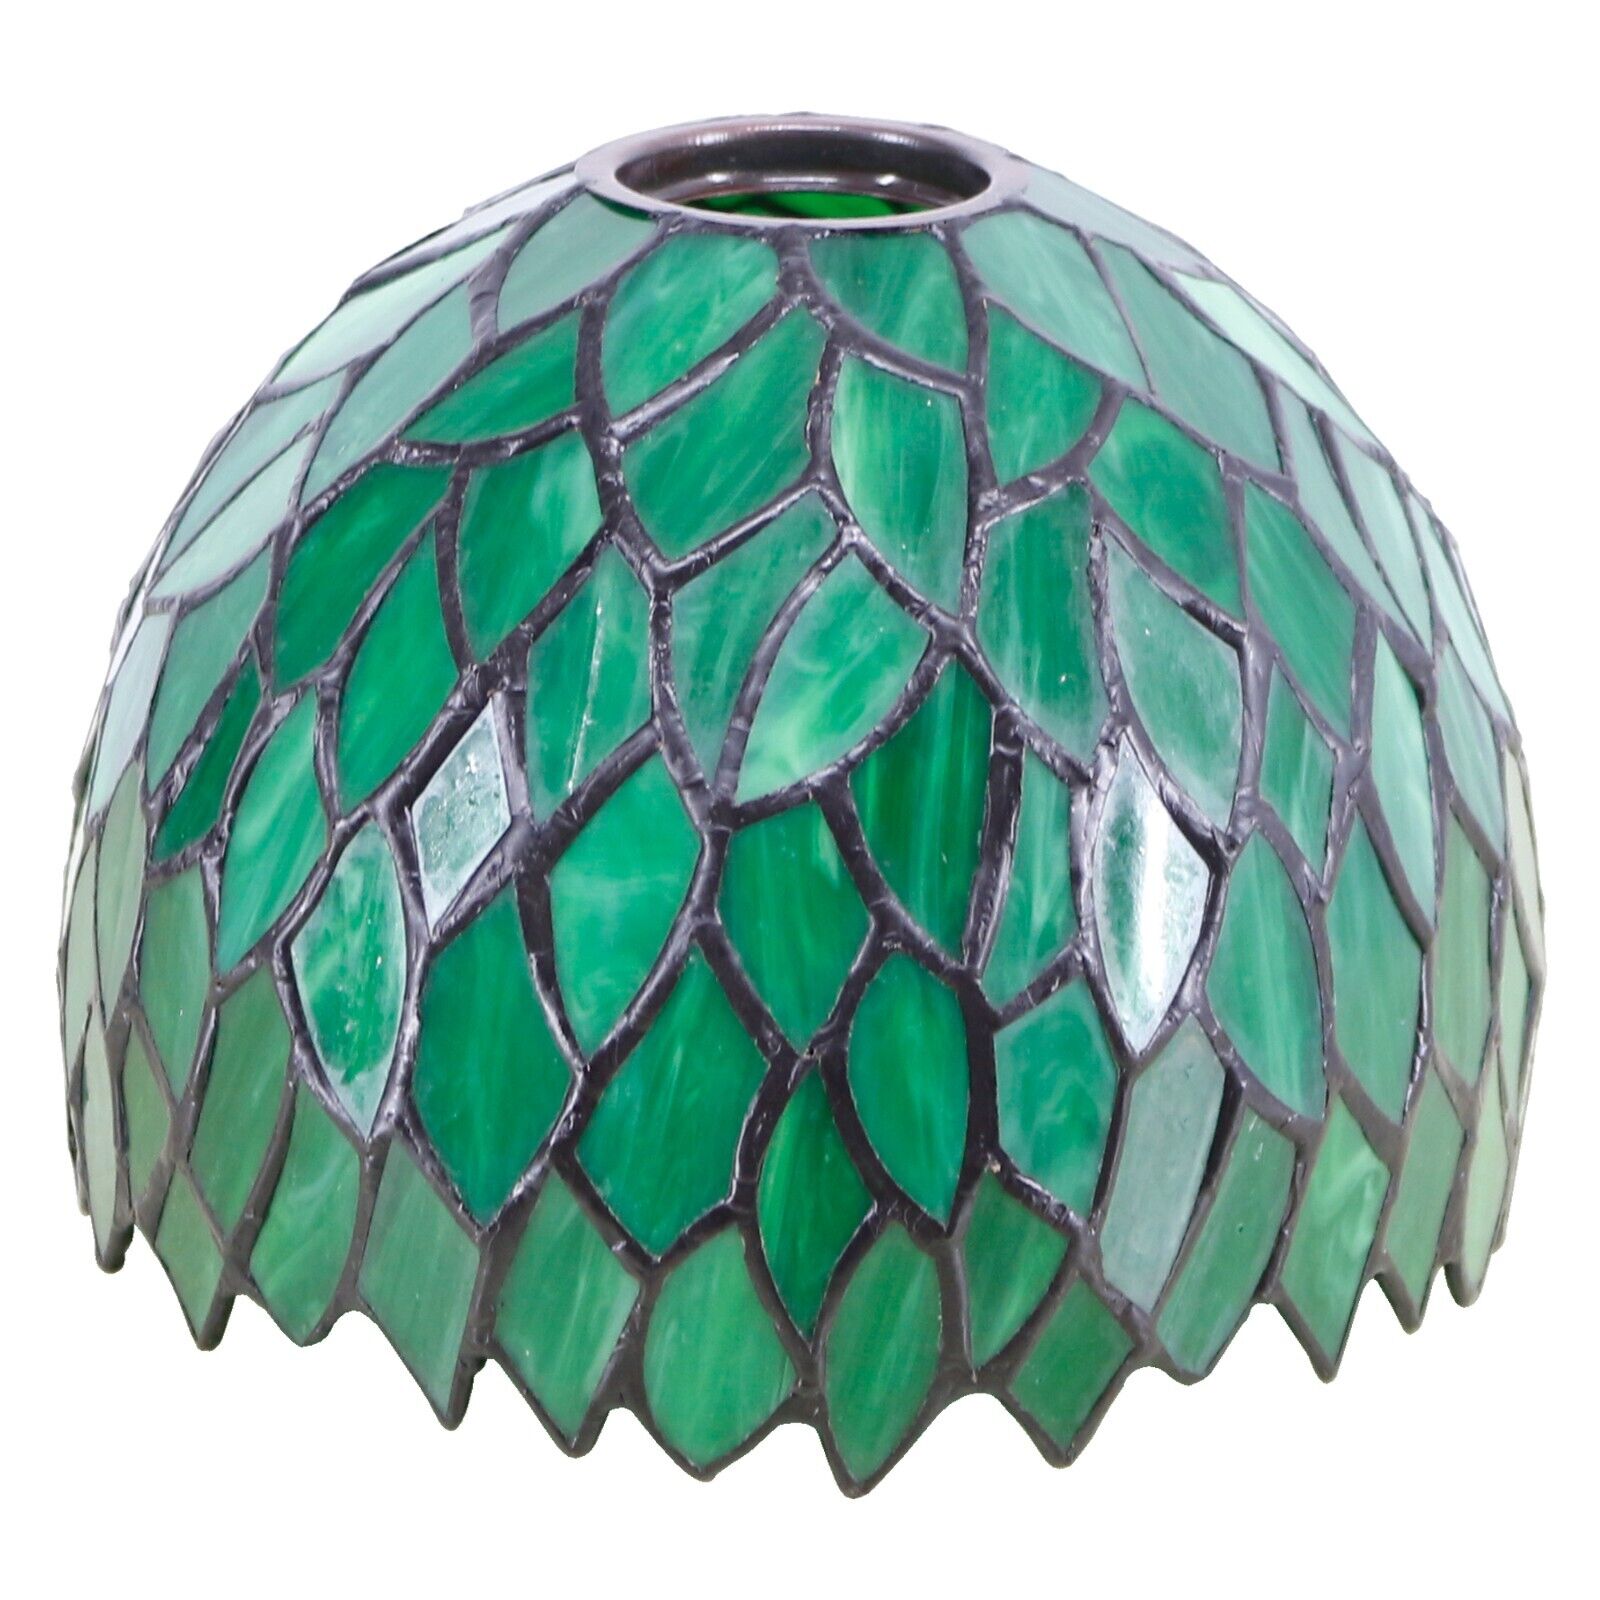 Small Tiffany Lamp Shade Replacement Green Wisteria Leaf Stained Glass Lampshade